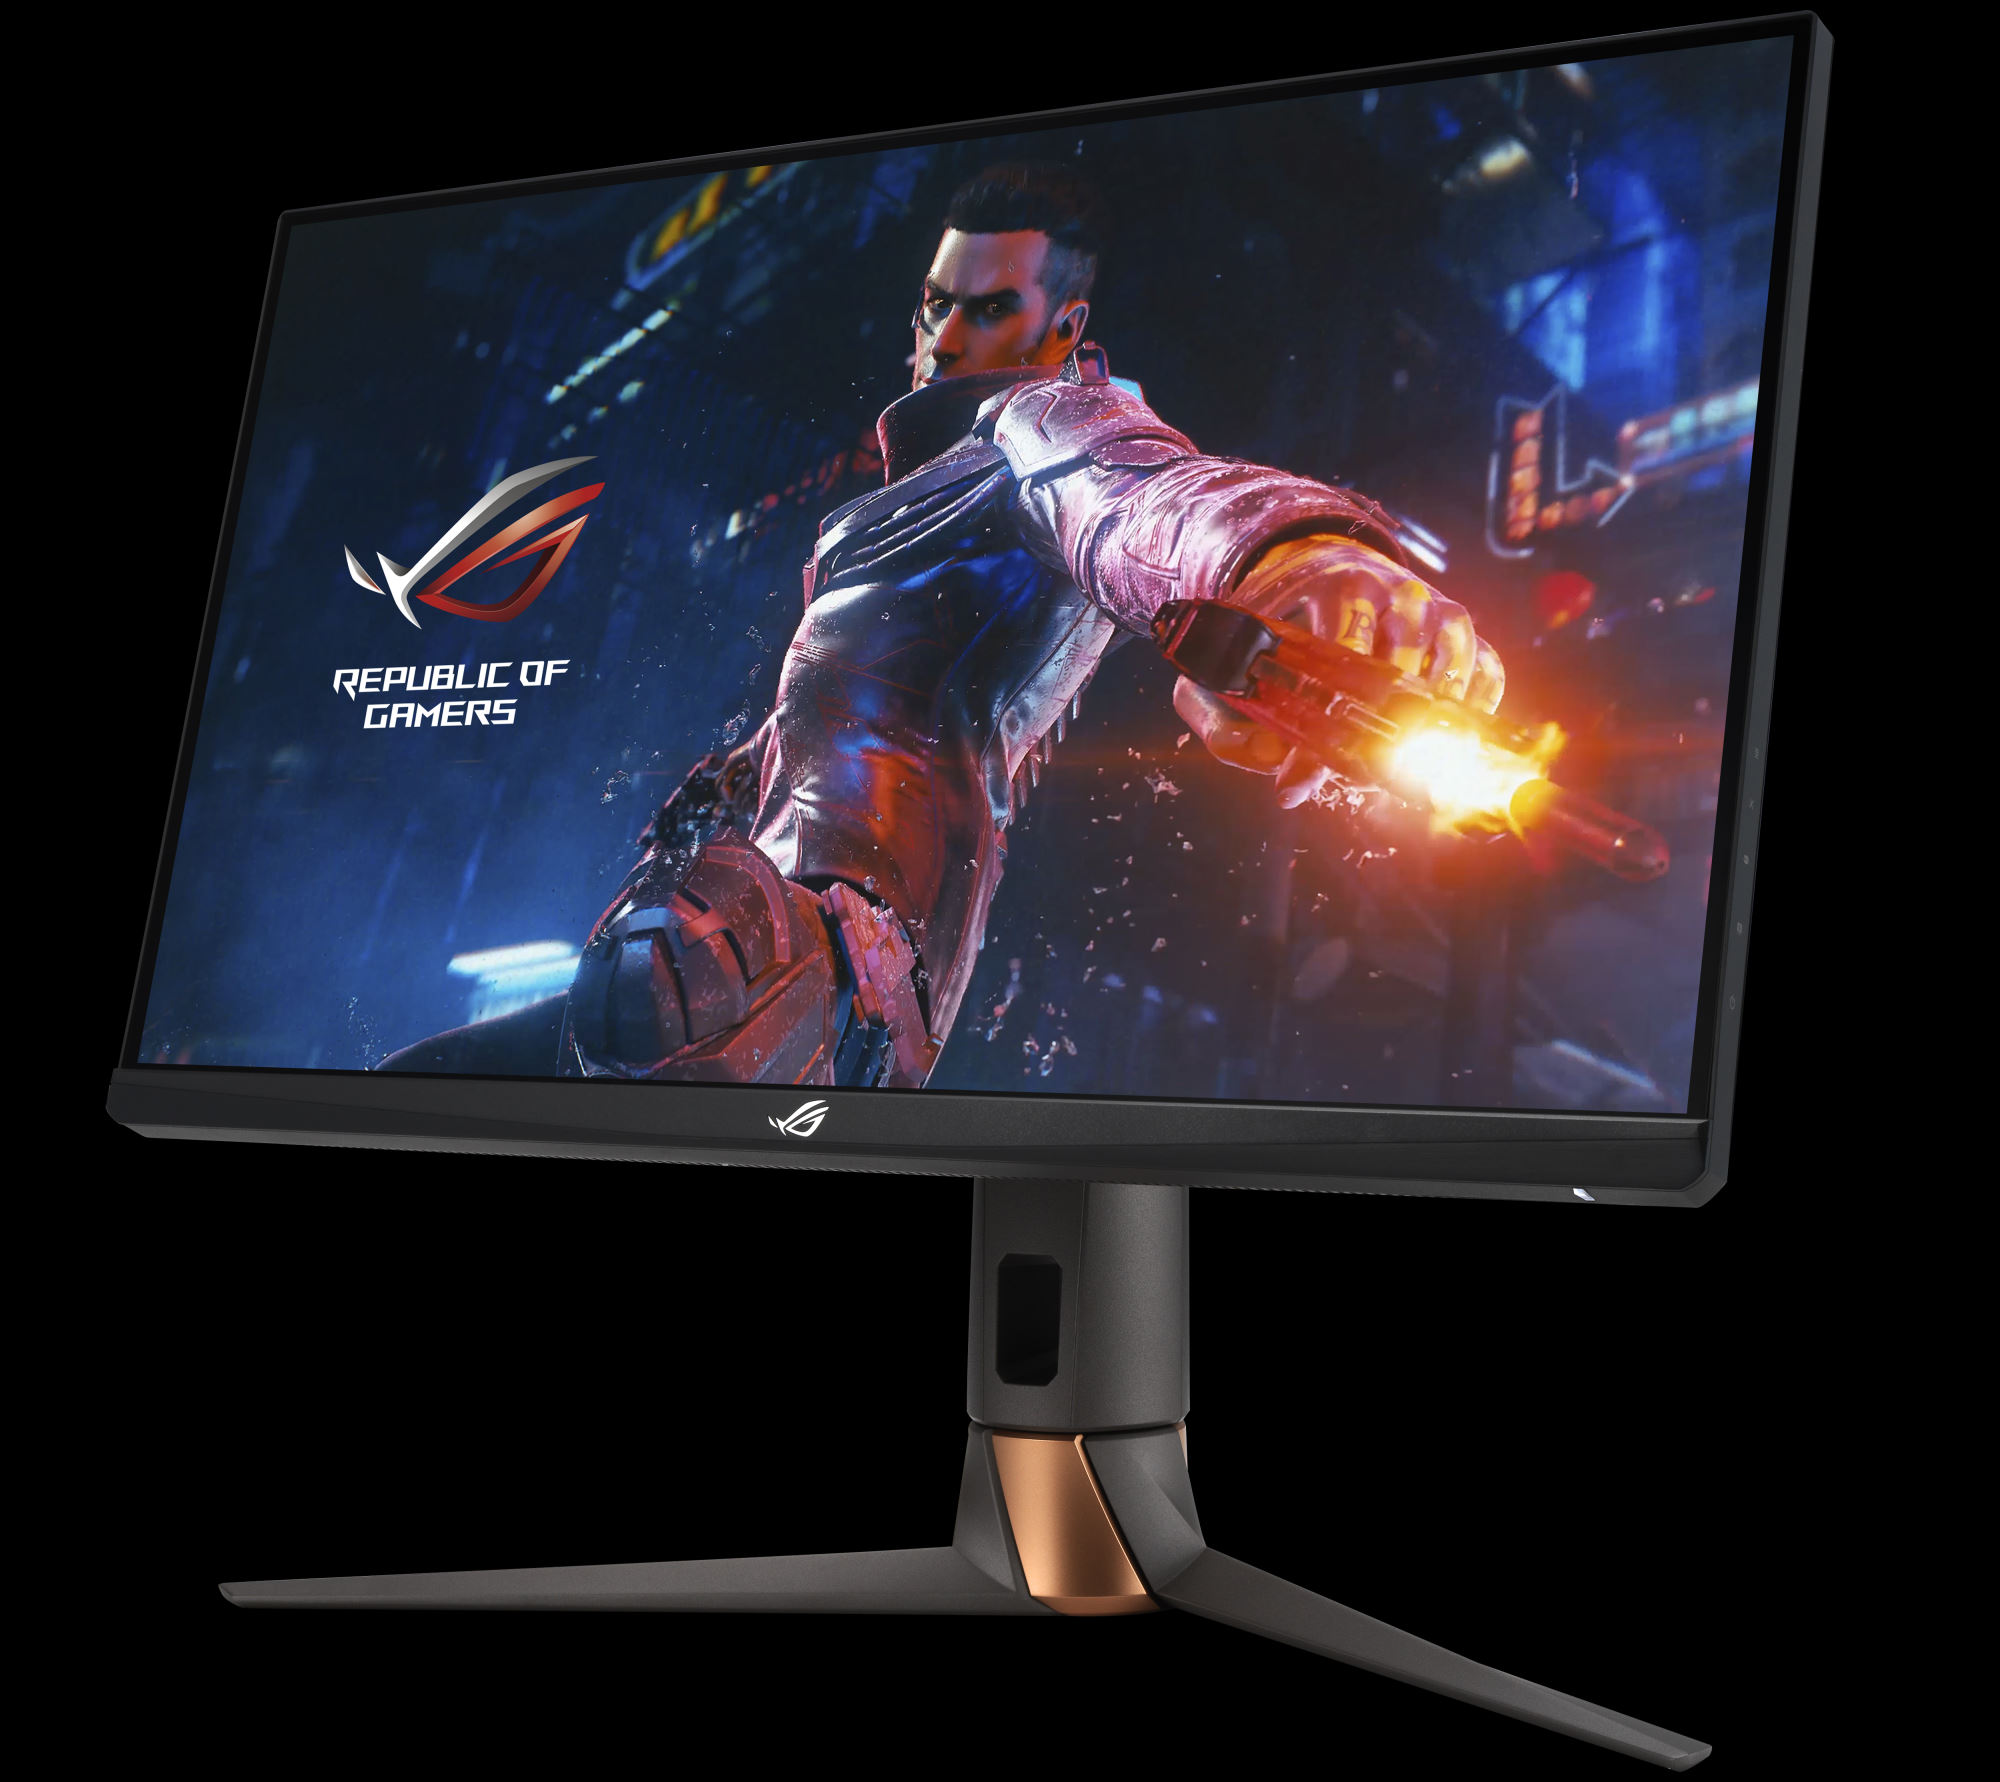 PG279QM front view, with ROG SAGA character HORSEM4N on screen.